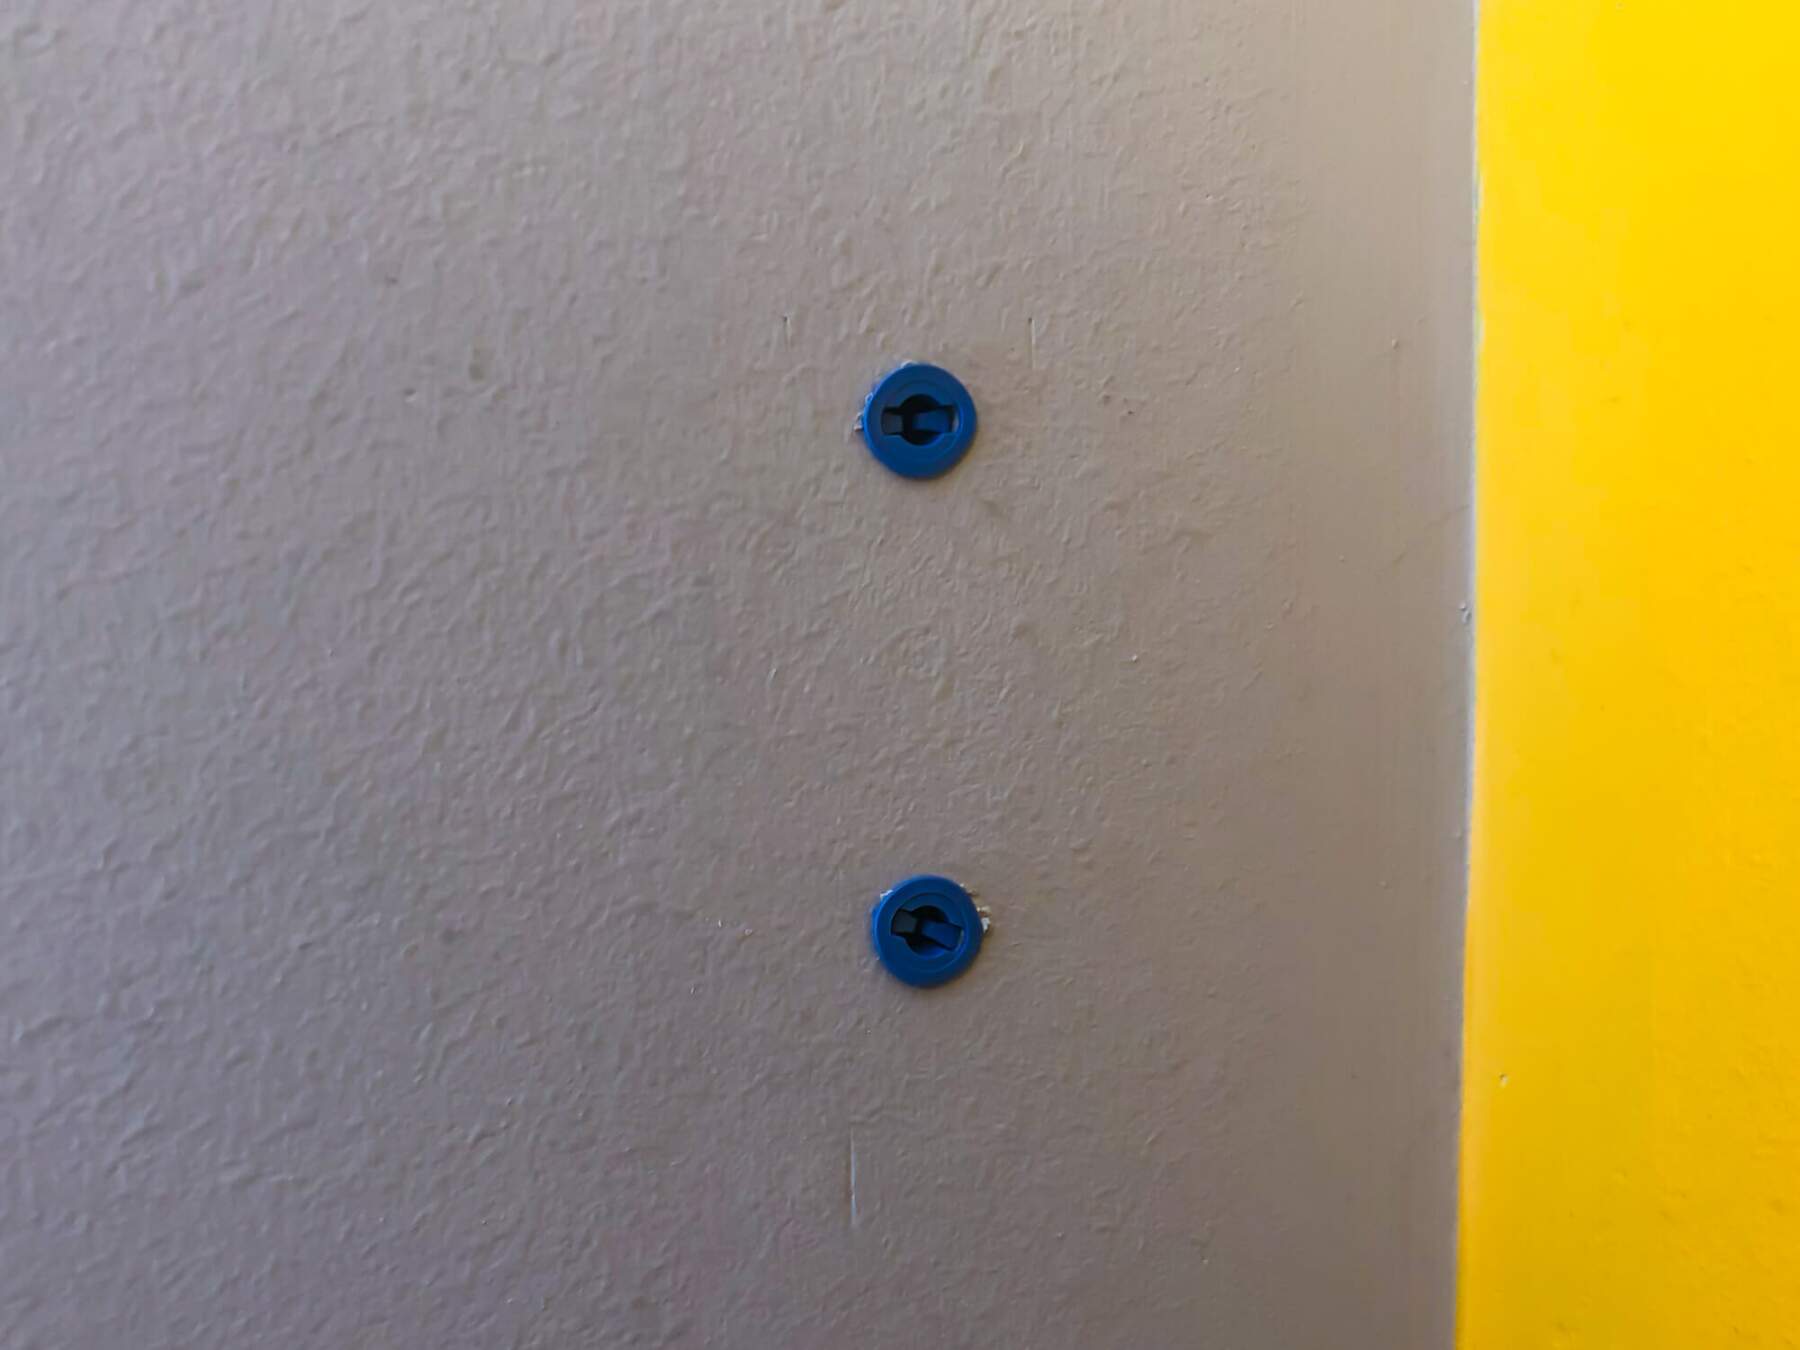 Holes drilled, and wall plugs installed